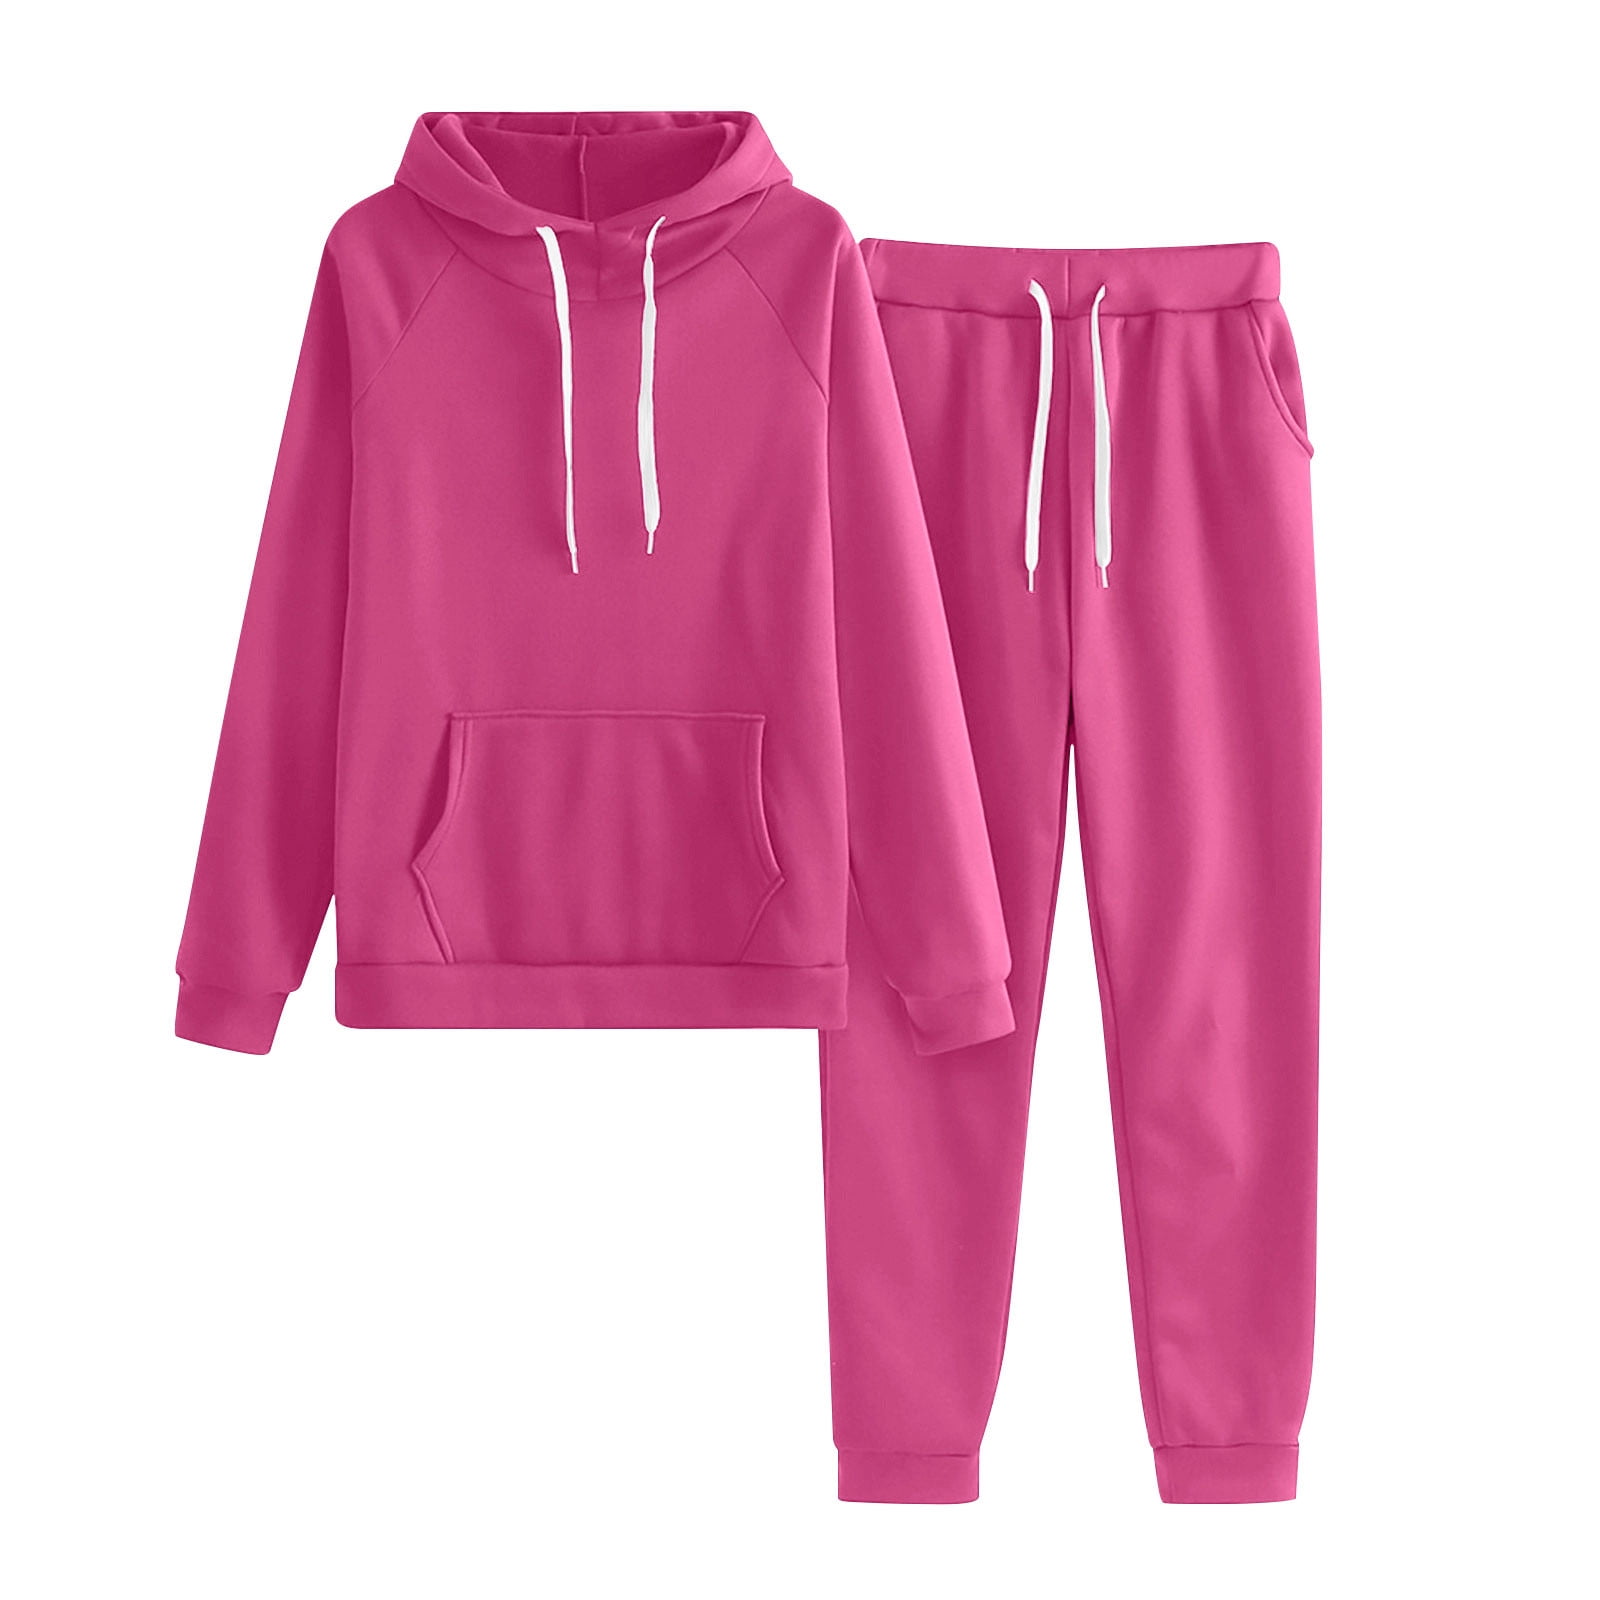 CaComMARK PI Clearance Womens Two Piece Outfits Casual Sweatsuits Solid  Tracksuit Jogging Sweat Suits Matching Jogger Hoodie Pants Set Hot Pink